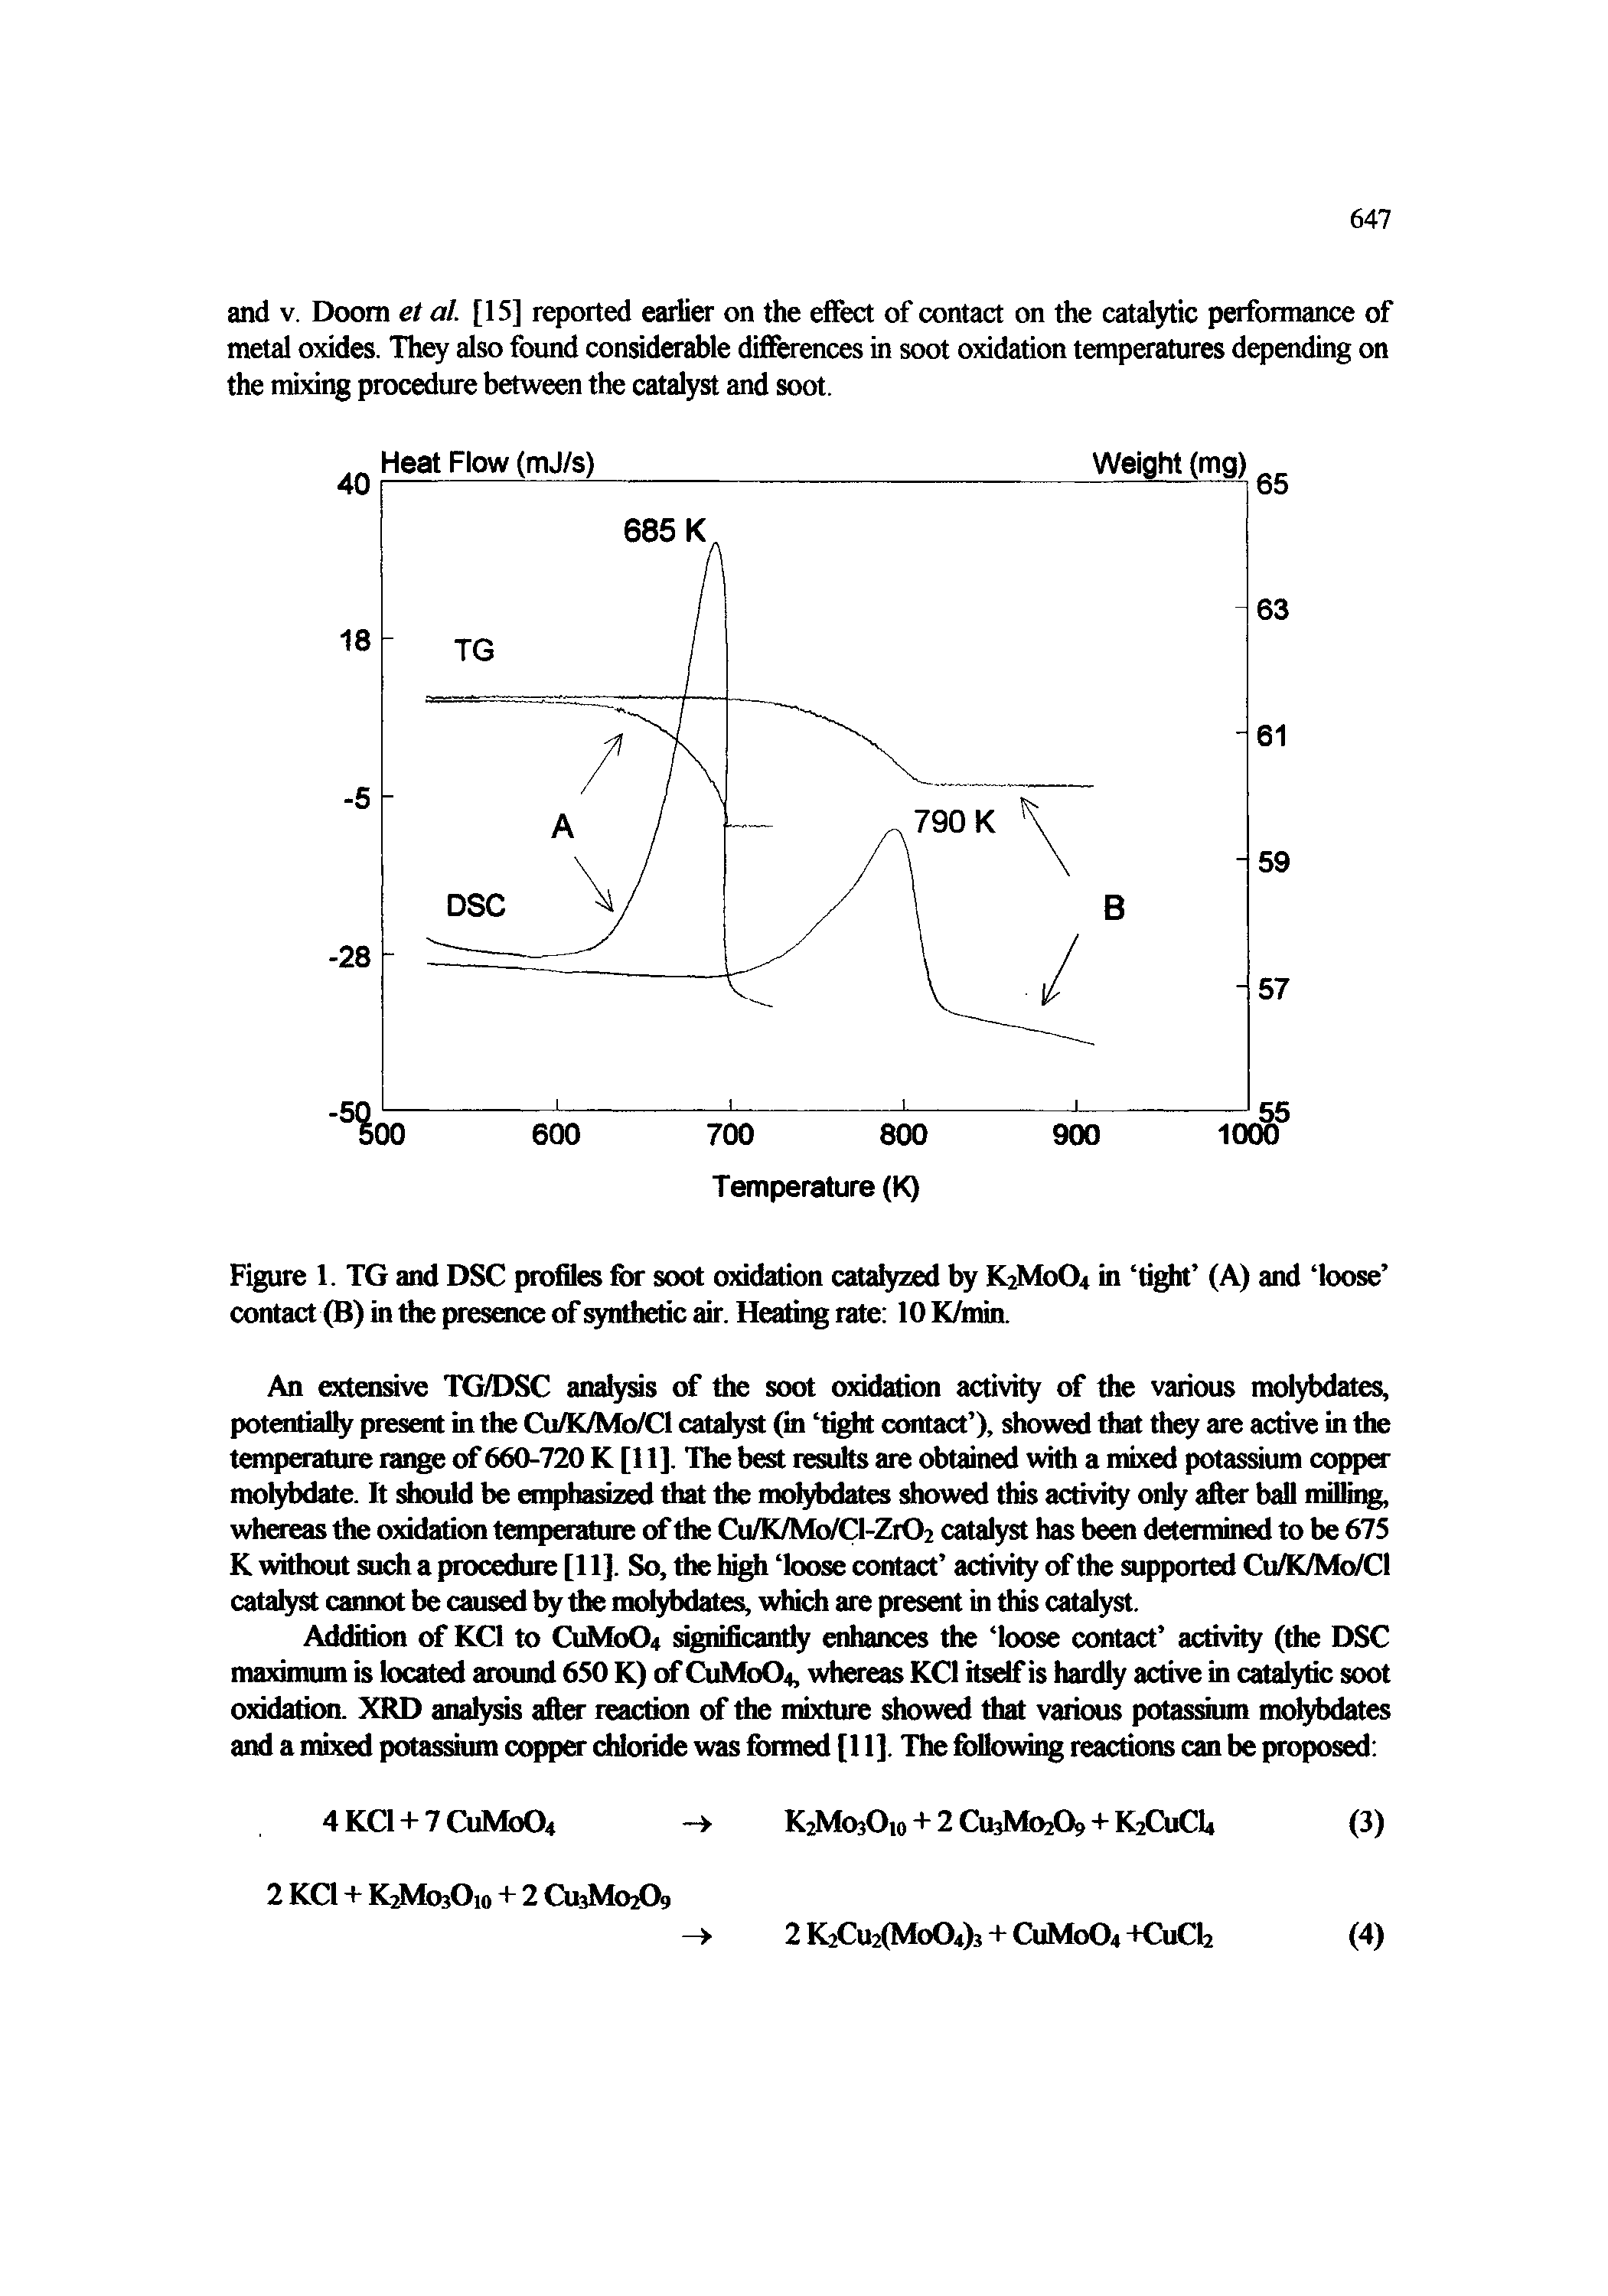 Figure 1. TG and DSC profiles firr soot oxidation catalyzed by K2M0O4 in tigjit (A) and loose contact (B) in the presence of iqmthetic air. Heating rate 10 K/min.